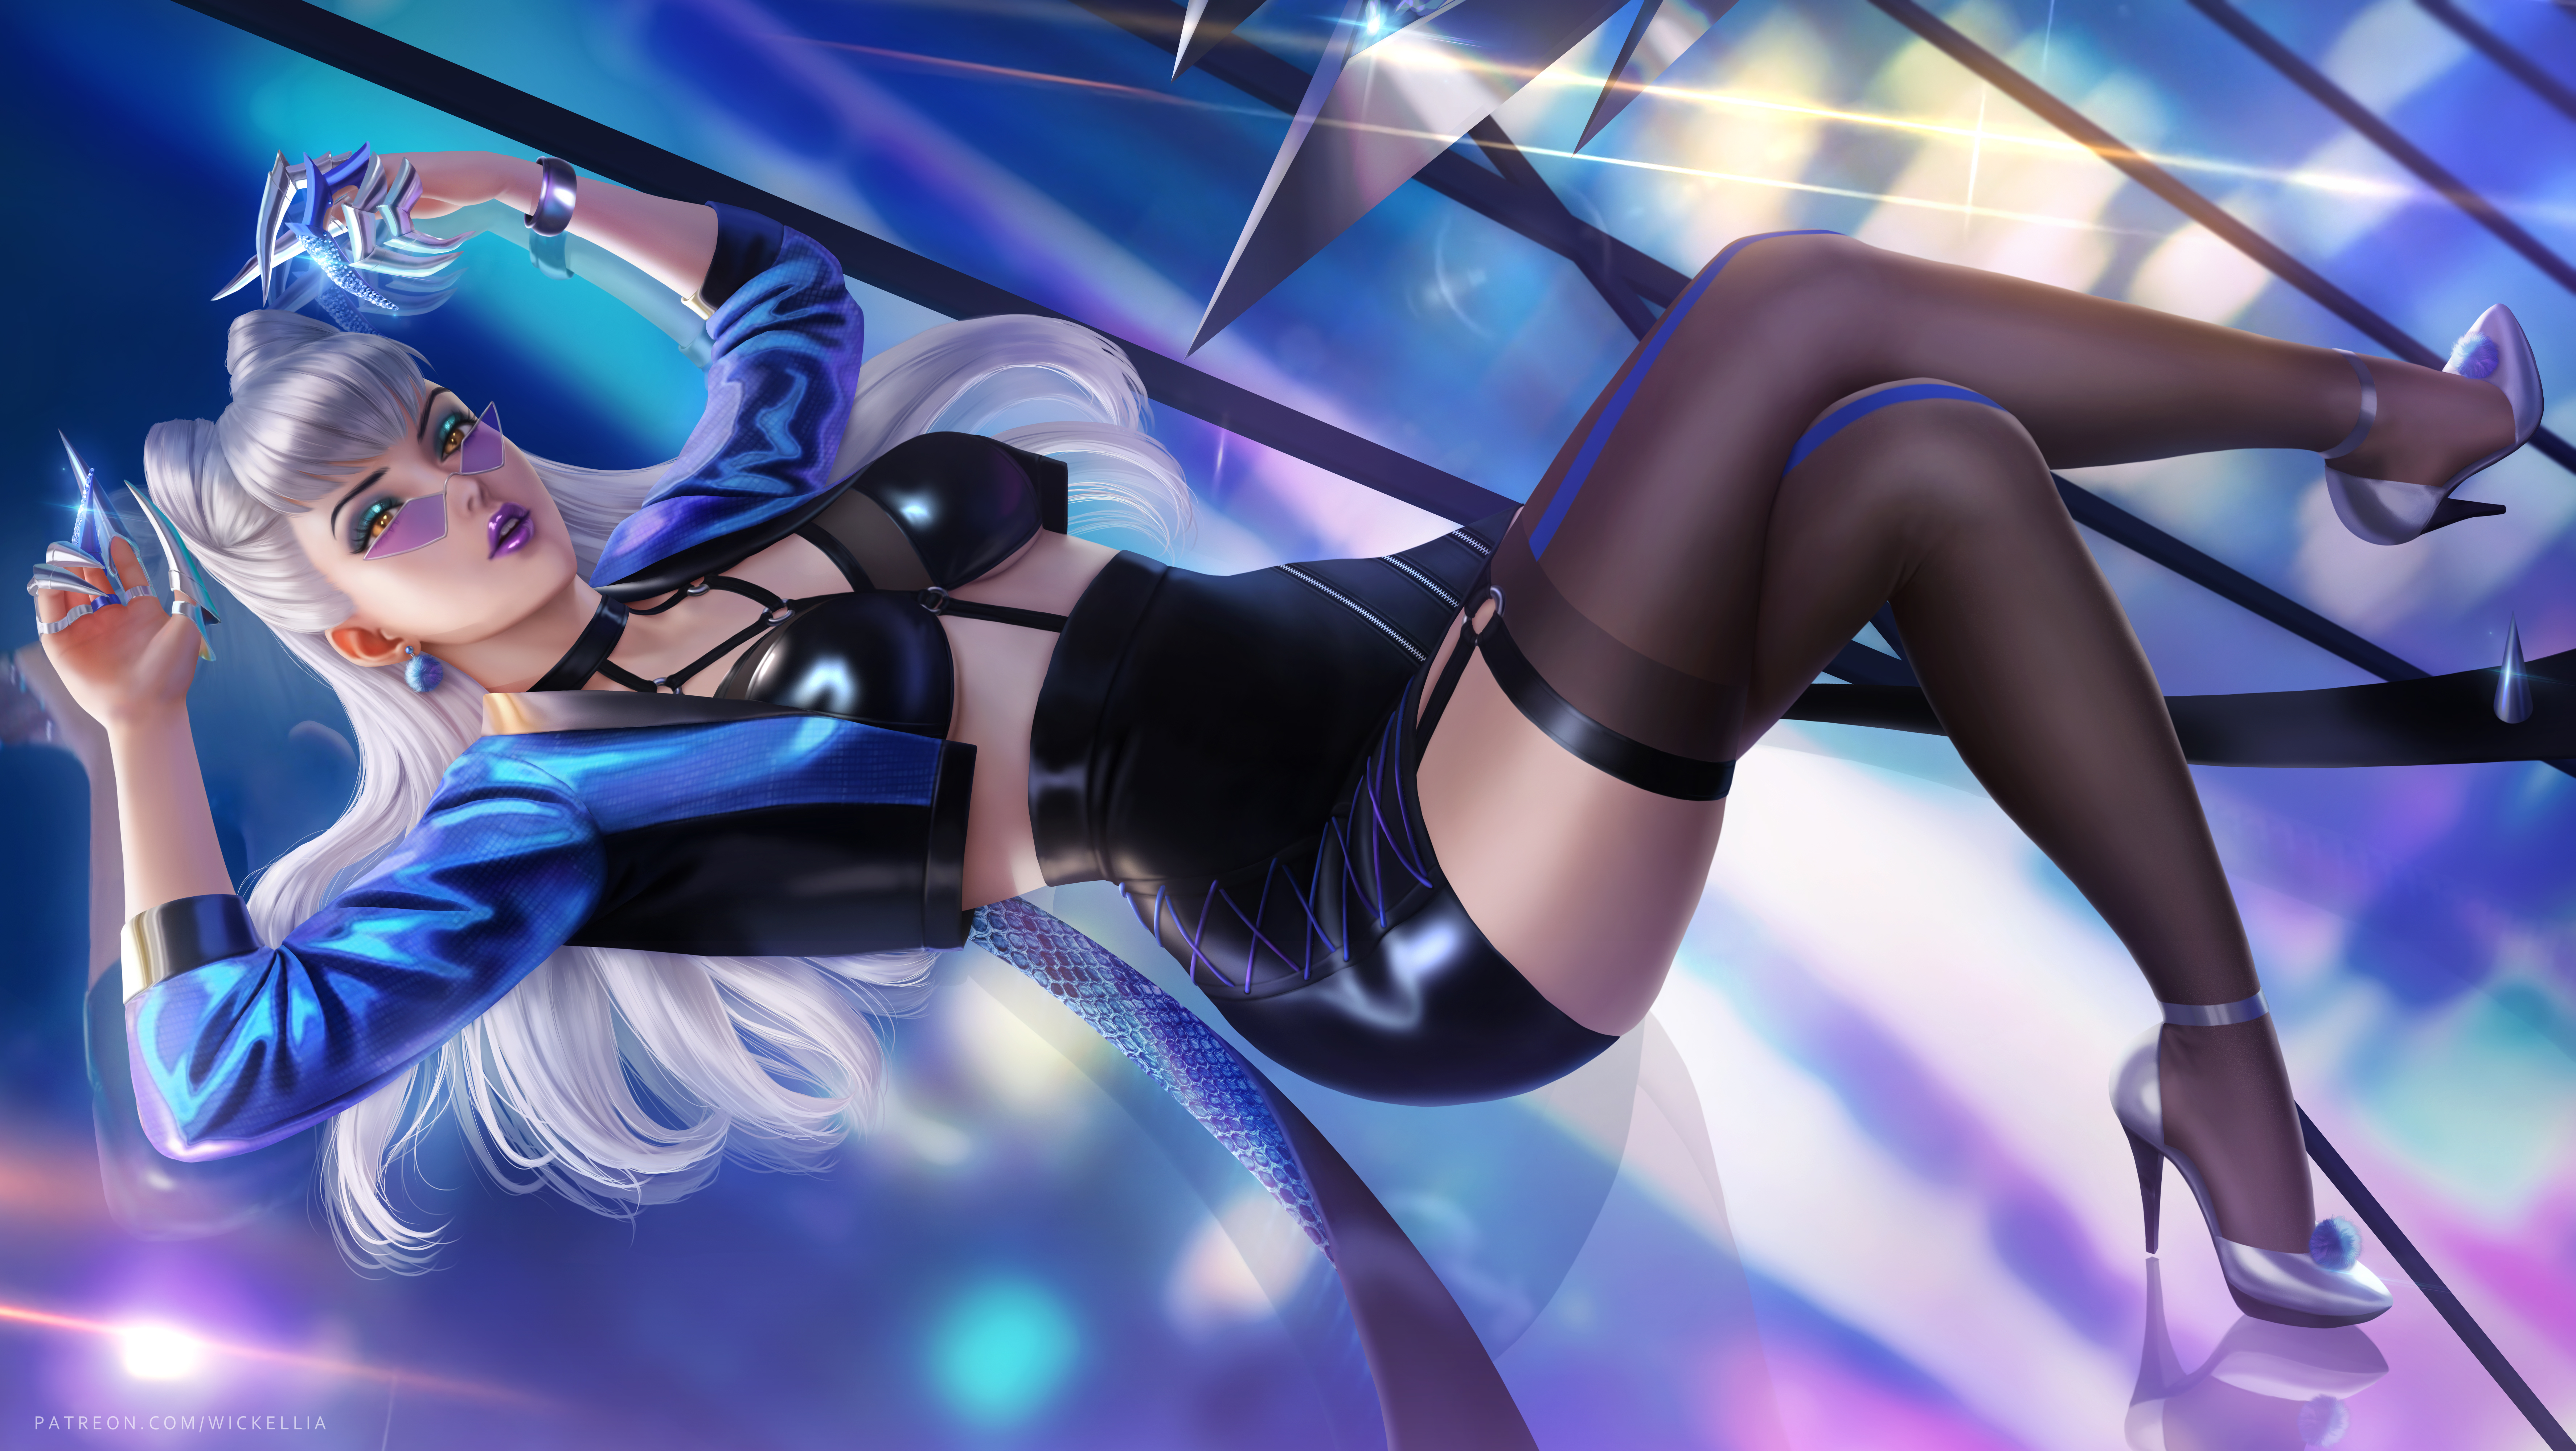 General 7100x4000 illustration artwork digital art fan art drawing fantasy girl fantasy art Wickellia video games video game girls video game art video game characters women League of Legends Evelynn (League of Legends) looking at viewer long hair purple hair colorful thigh-highs skirt